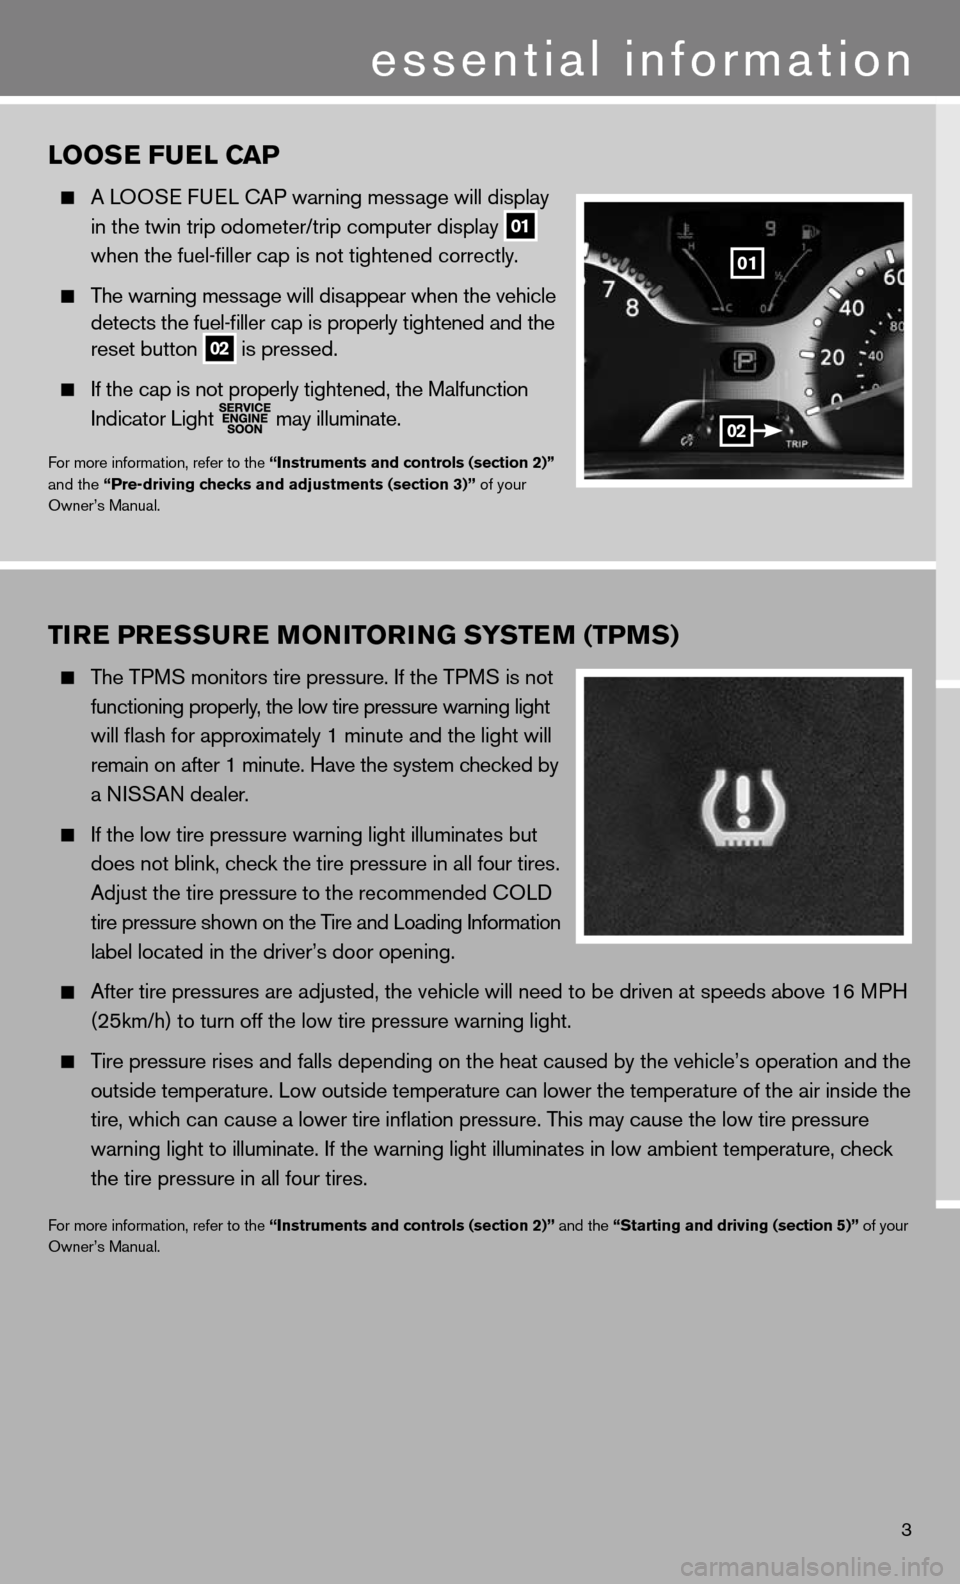 NISSAN CUBE 2011 3.G Quick Reference Guide 3
essential information
LOOSe Fue L CaP
  A LOOS e fue L cAP warning message will display 
    in the twin trip odometer/trip computer display
 
01 
   when the fuel-filler cap is not tightened correc